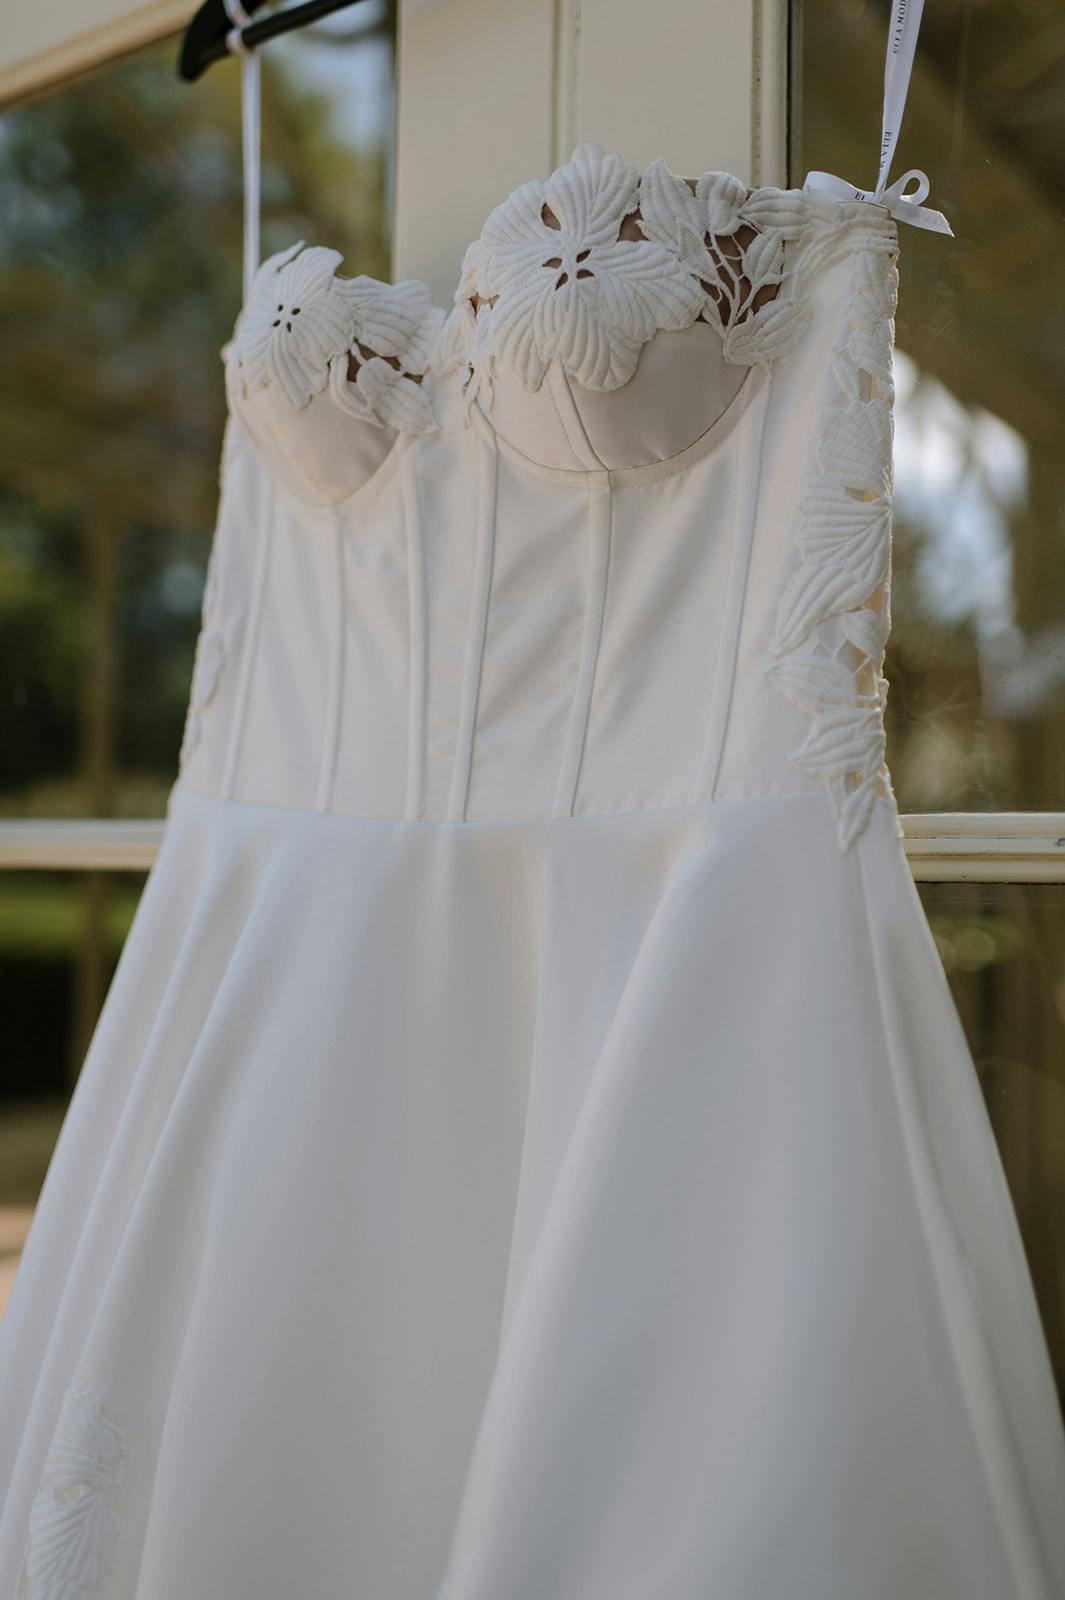 A close-up of a white strapless wedding dress hanging on a hanger. The dress has floral lace detailing around the bust and on the edges of the bodice. The fabric is smooth and the overall design of the dress is elegant and sophisticated.